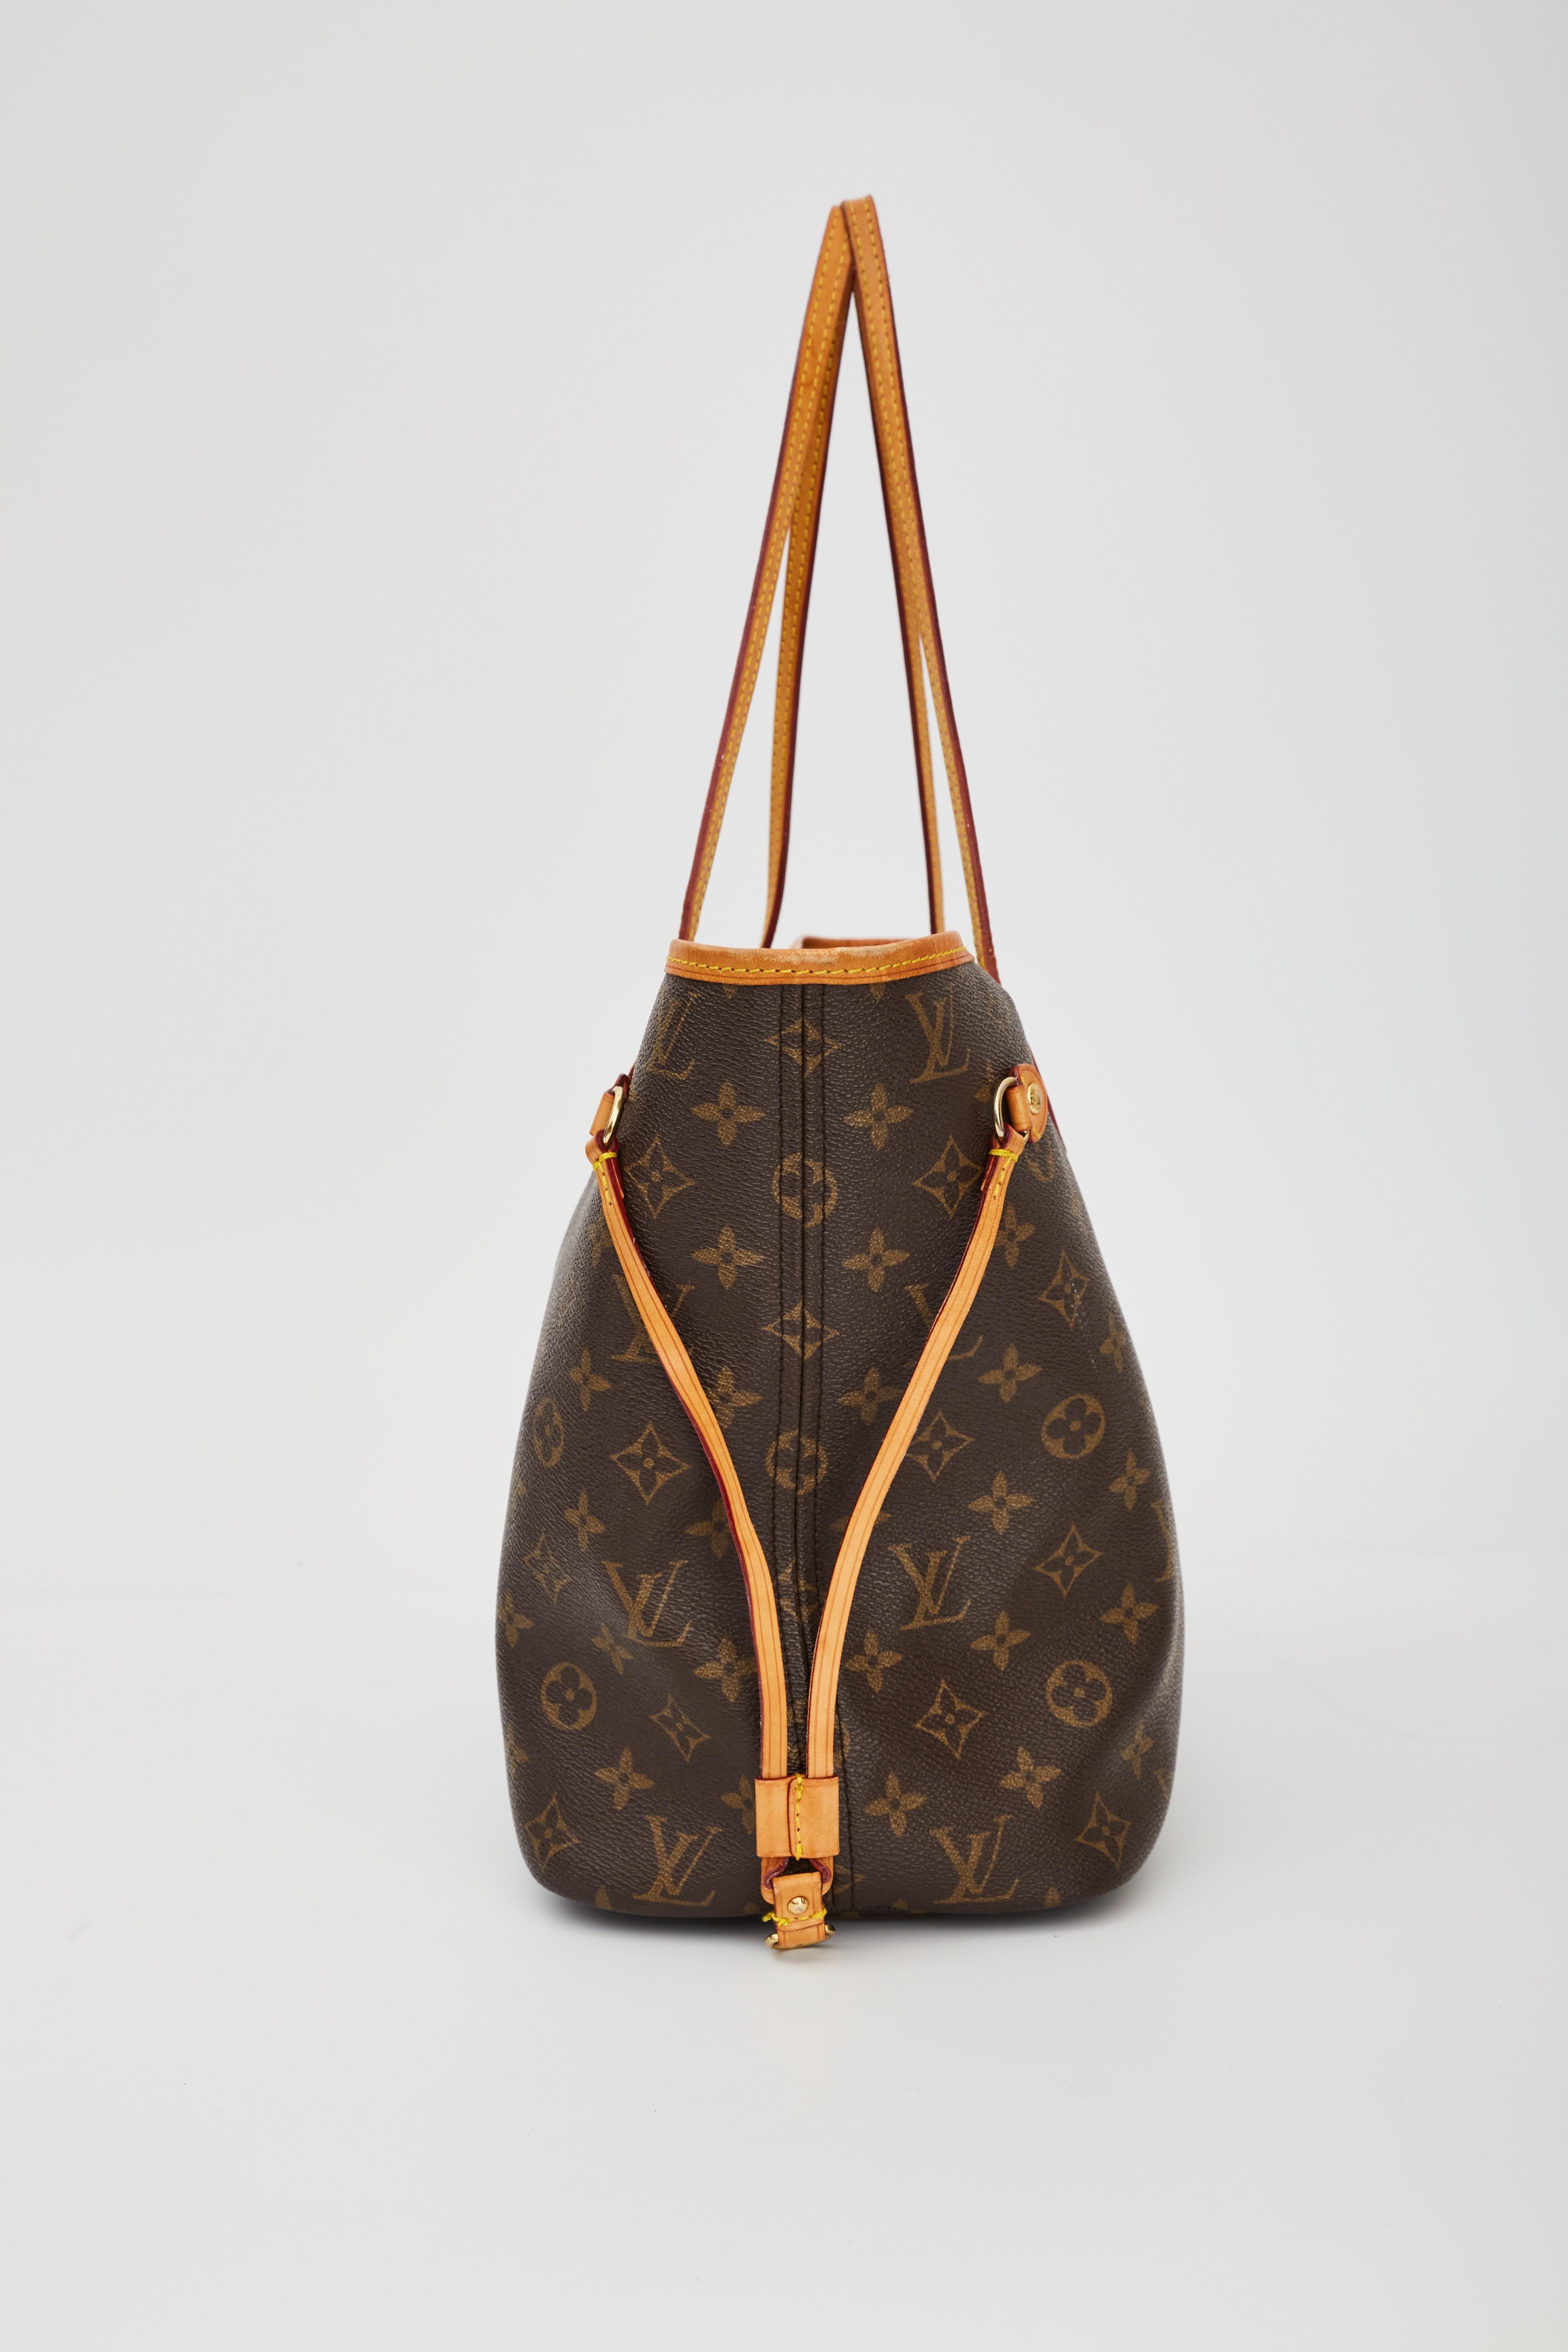 This tote is made of classic Louis Vuitton monogram coated canvas. The bag features vachetta cowhide leather shoulder straps, trim and side cinch cords, with polished brass hardware. The wide top is open to a striped beige fabric interior with a